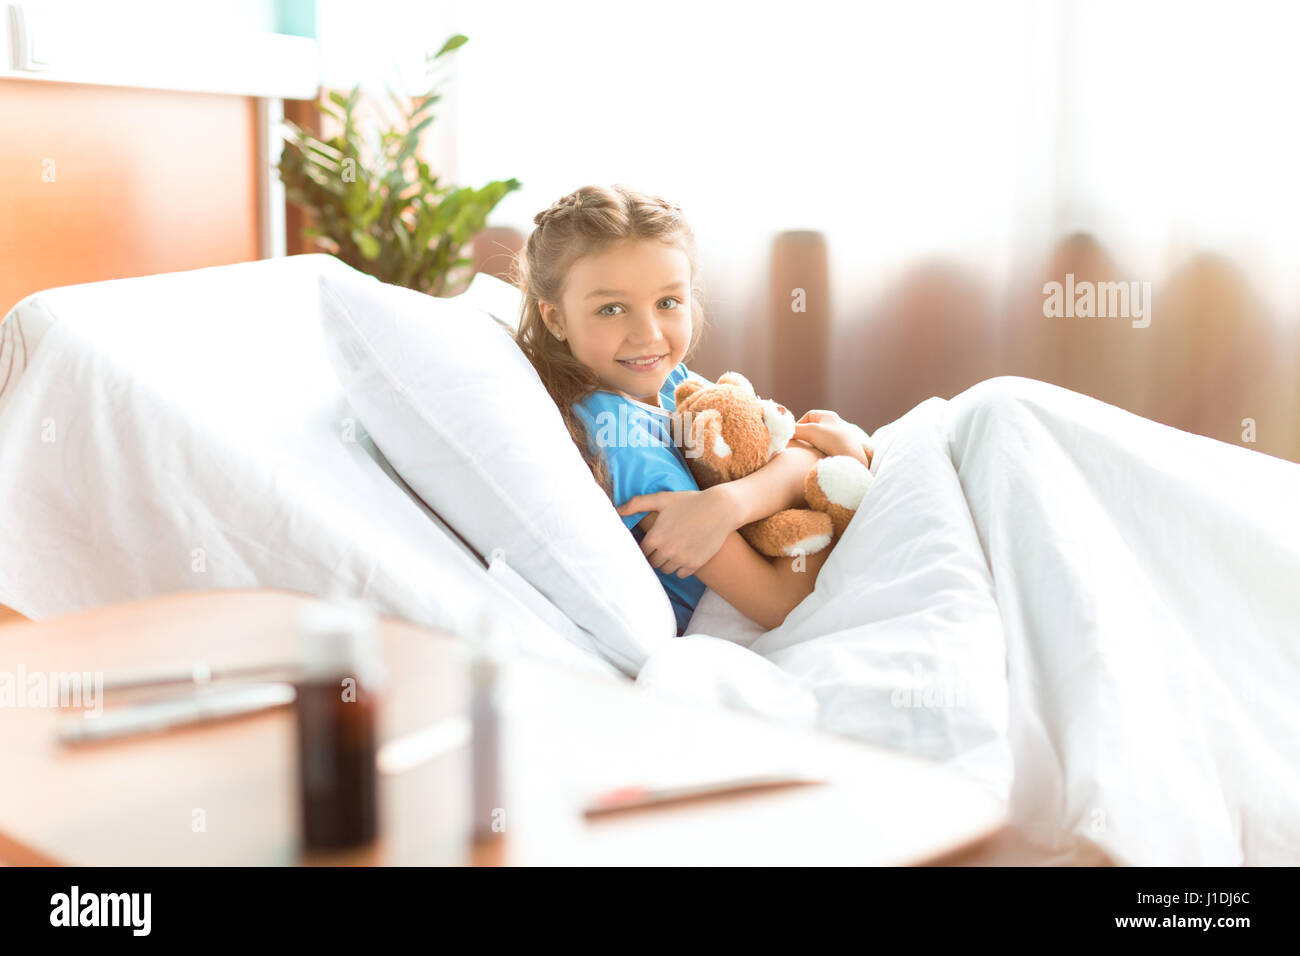 Cute little girl lying in hospital bed with teddy bear and smiling at camera Stock Photo